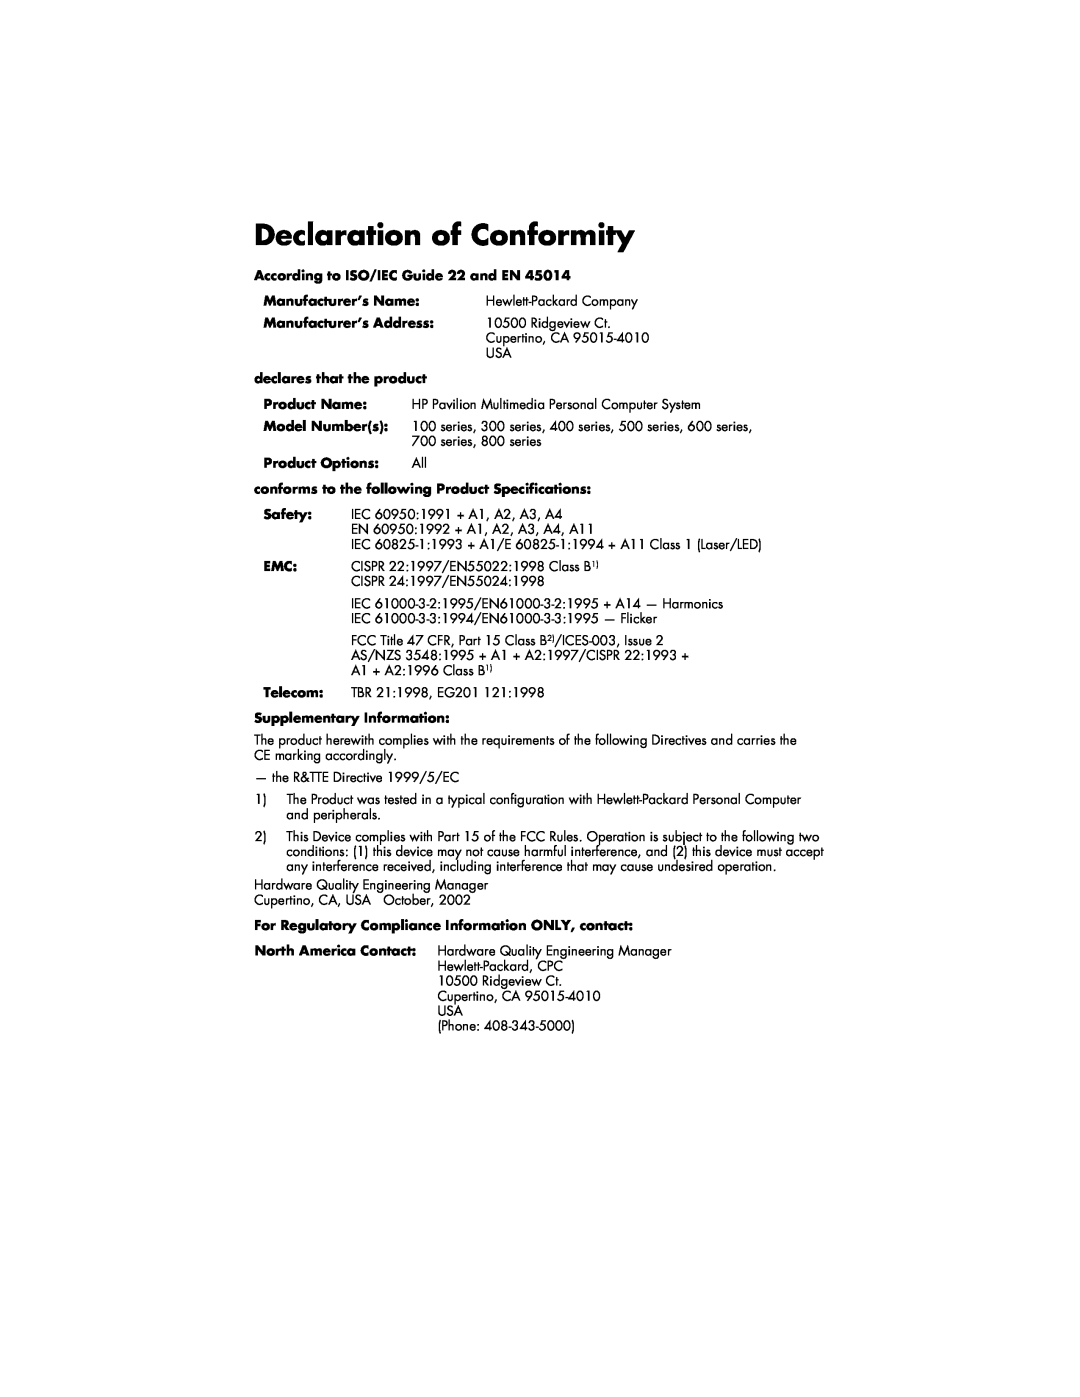 HP 764c (US/CAN), 734n (US/CAN) manual Declaration of Conformity, According to ISO/IEC Guide 22 and EN, Manufacturer’s Name 